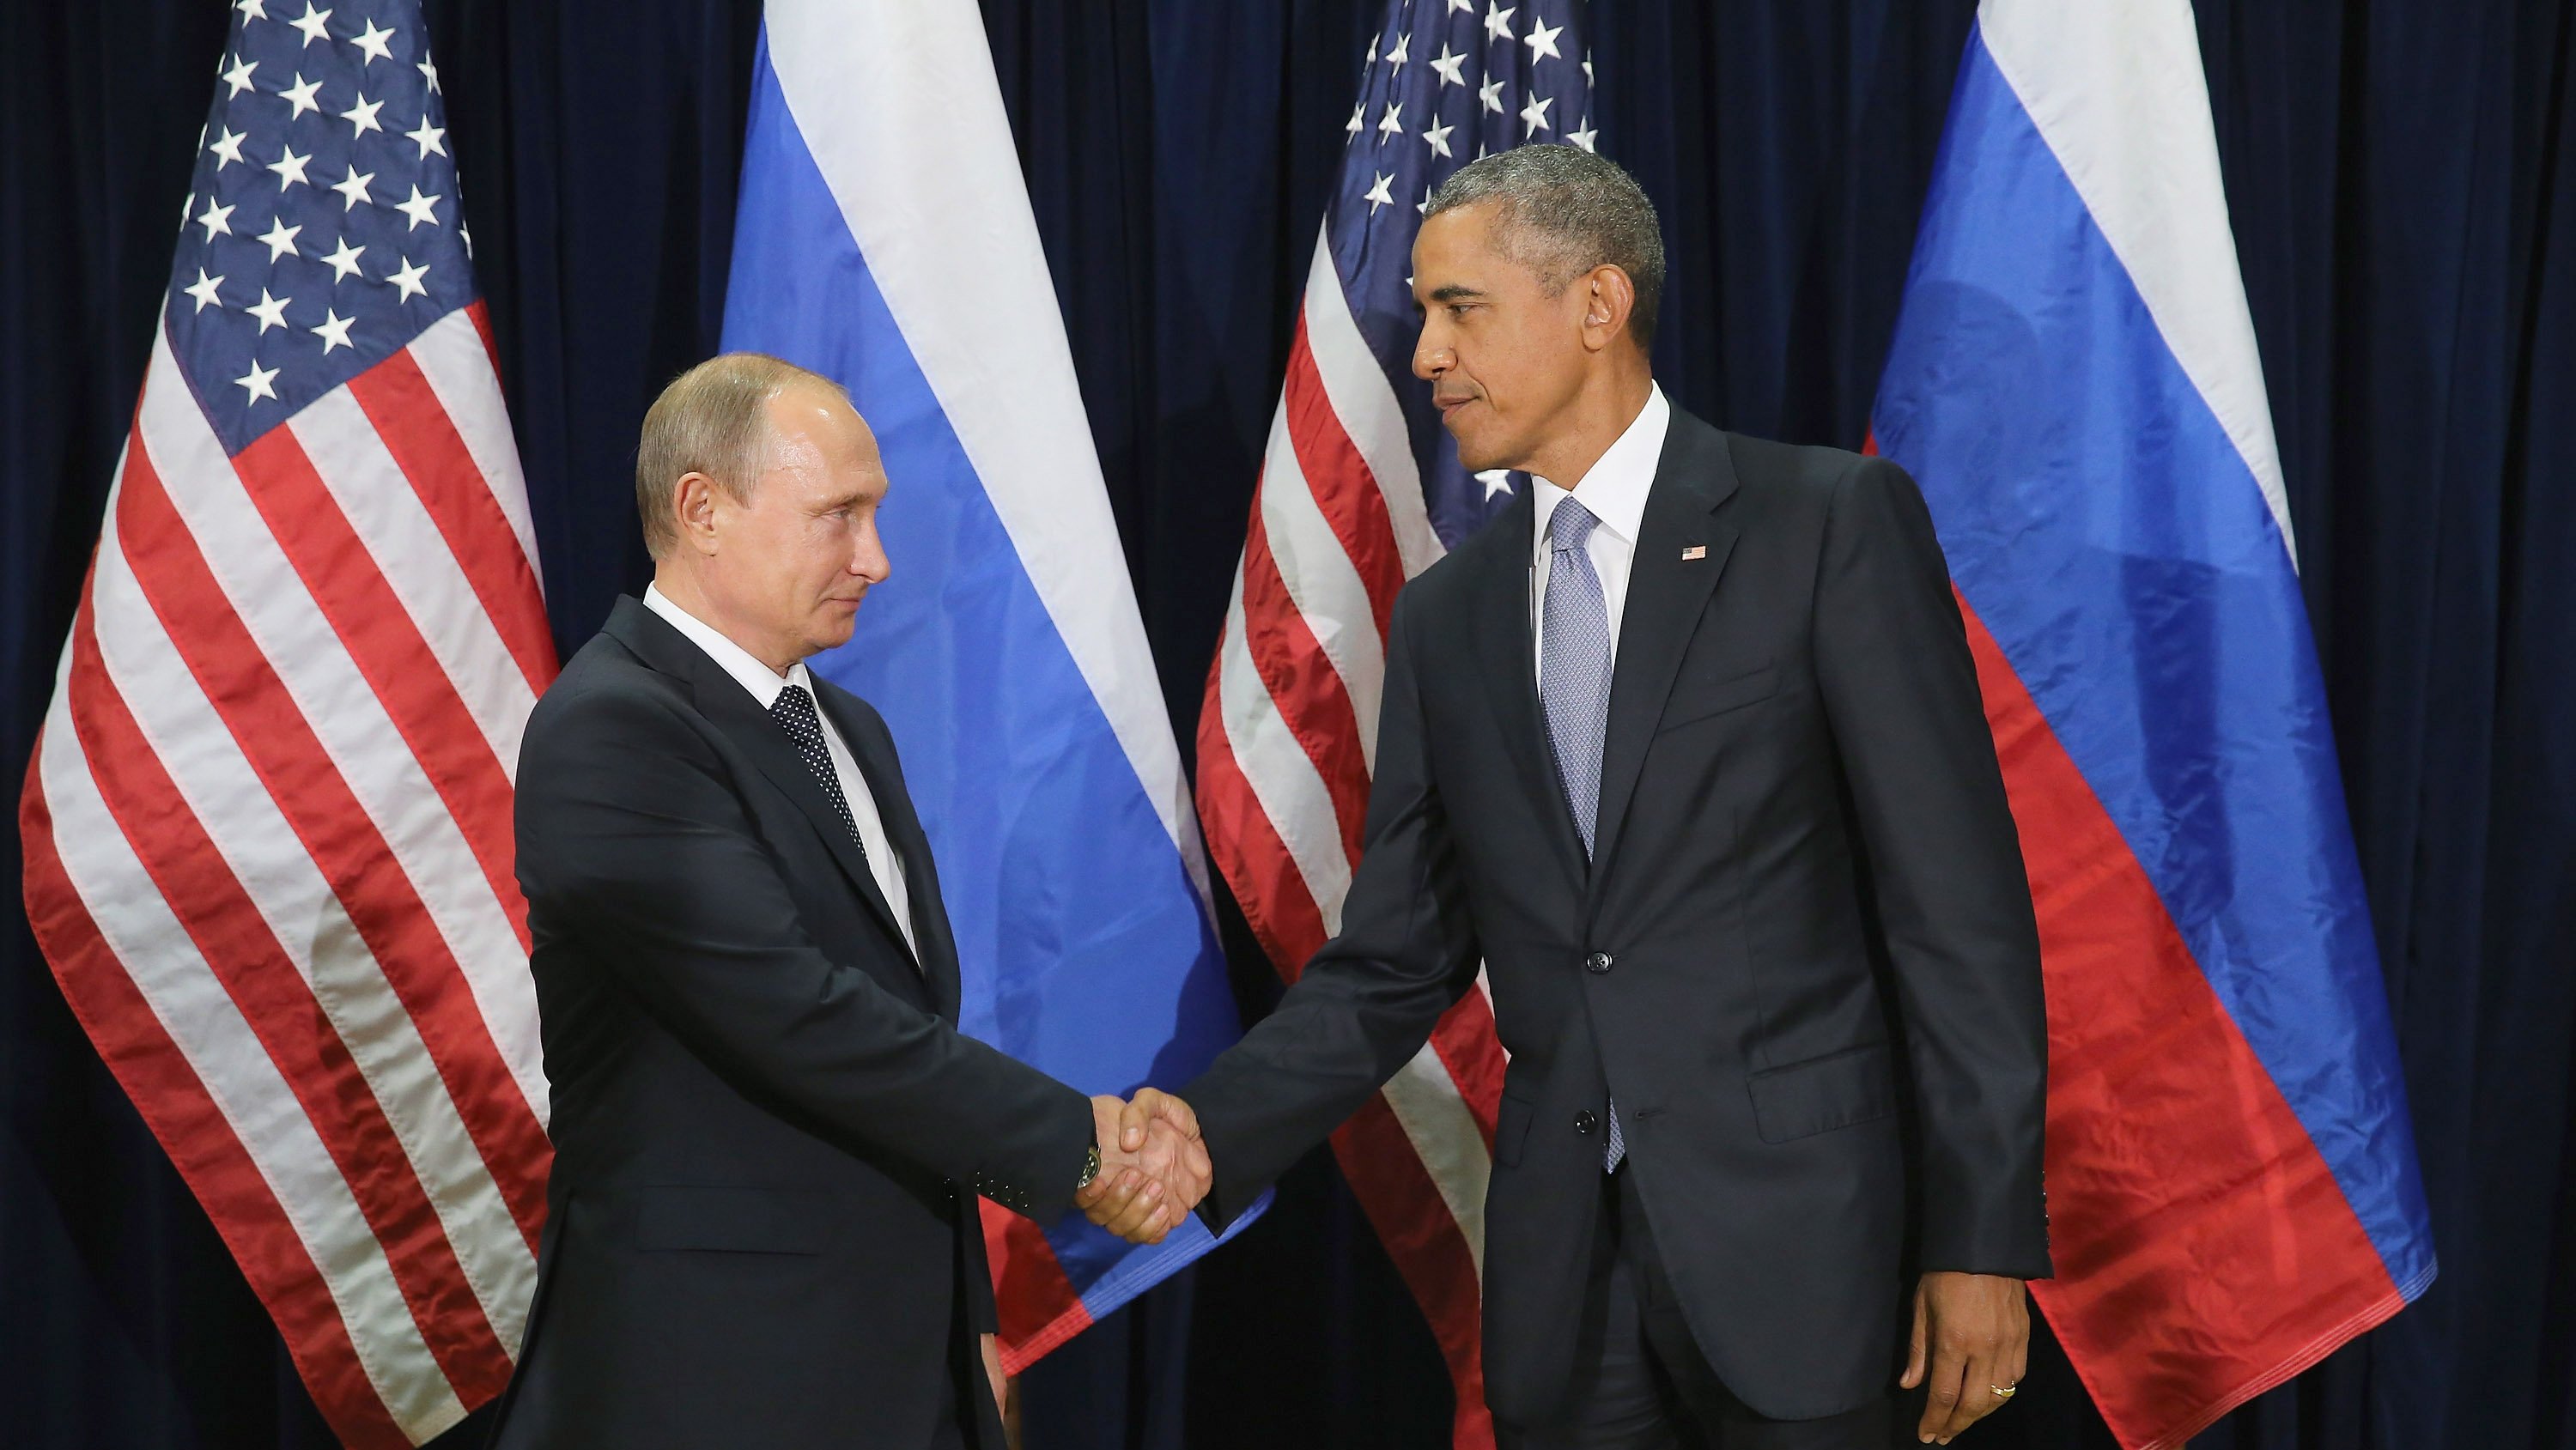 Obama Holds Bilateral Meeting With Russian President Putin At UN